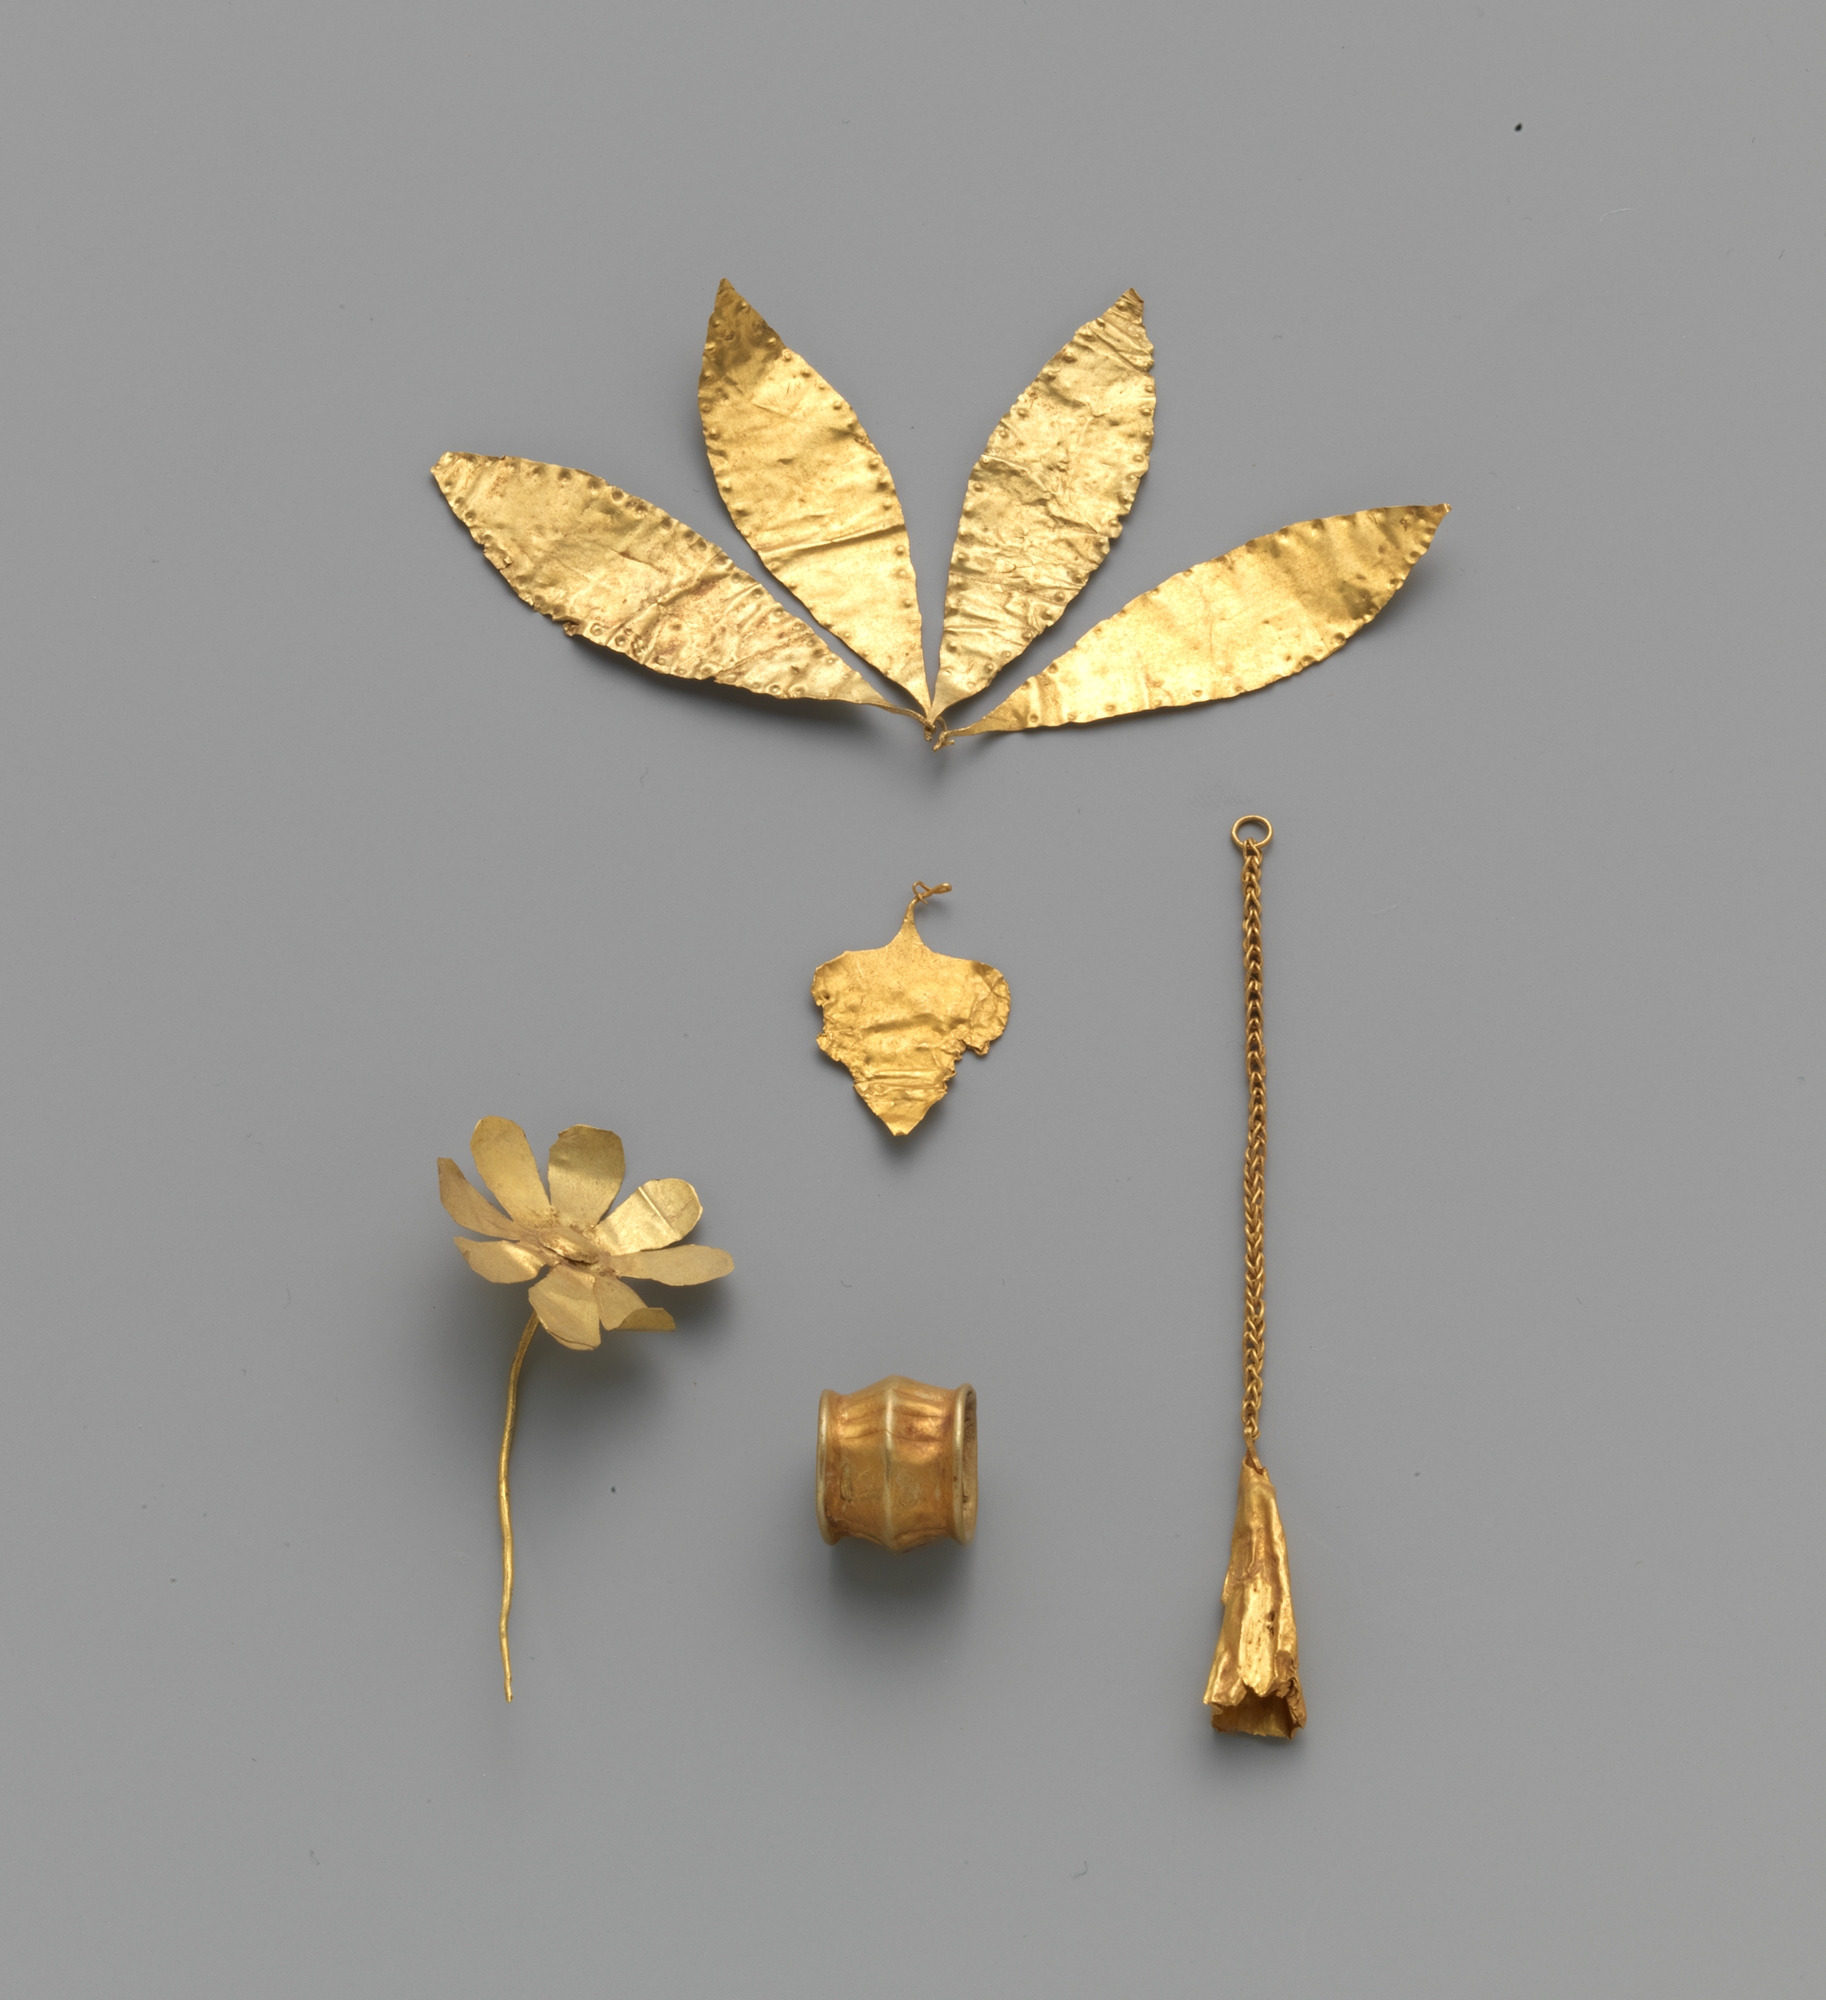 Minoan Hammered gold leaves from the Metropolitan Museum of Art